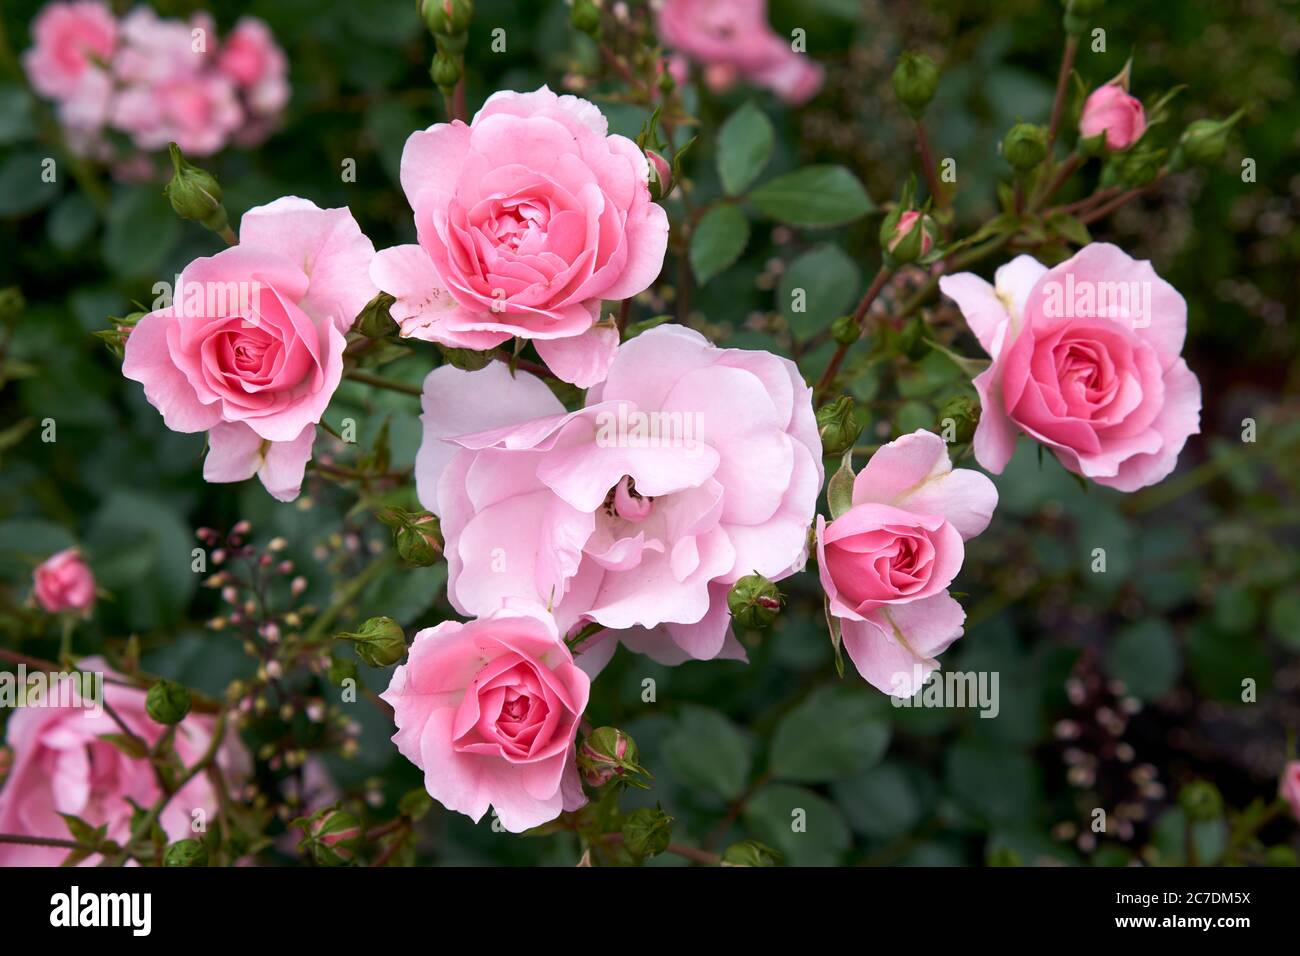 Closeup of a cluster of pink double roses blooming in summer Stock Photo